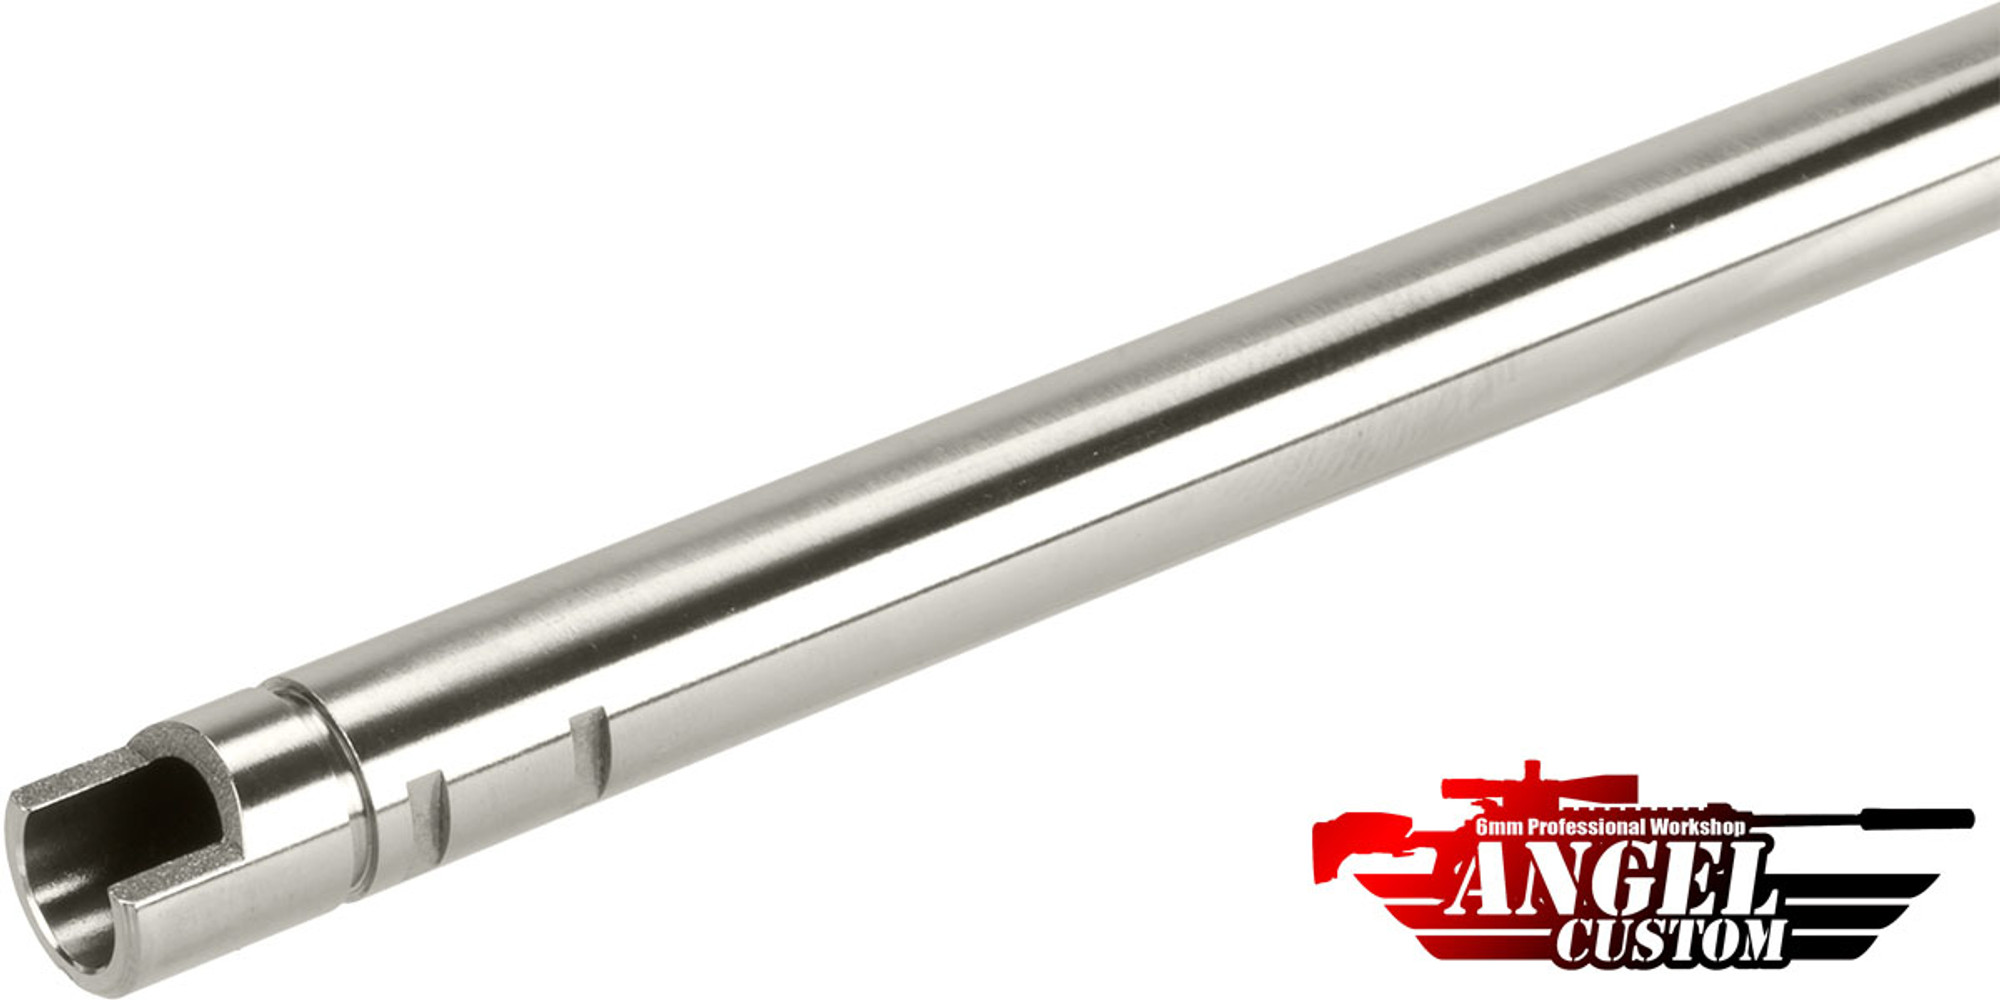 Angel Custom G2 SUS304 Stainless Steel 6.01mm Airsoft Tightbore Inner Barrel (225mm / WE GBB PDW P90 M4 CQB)